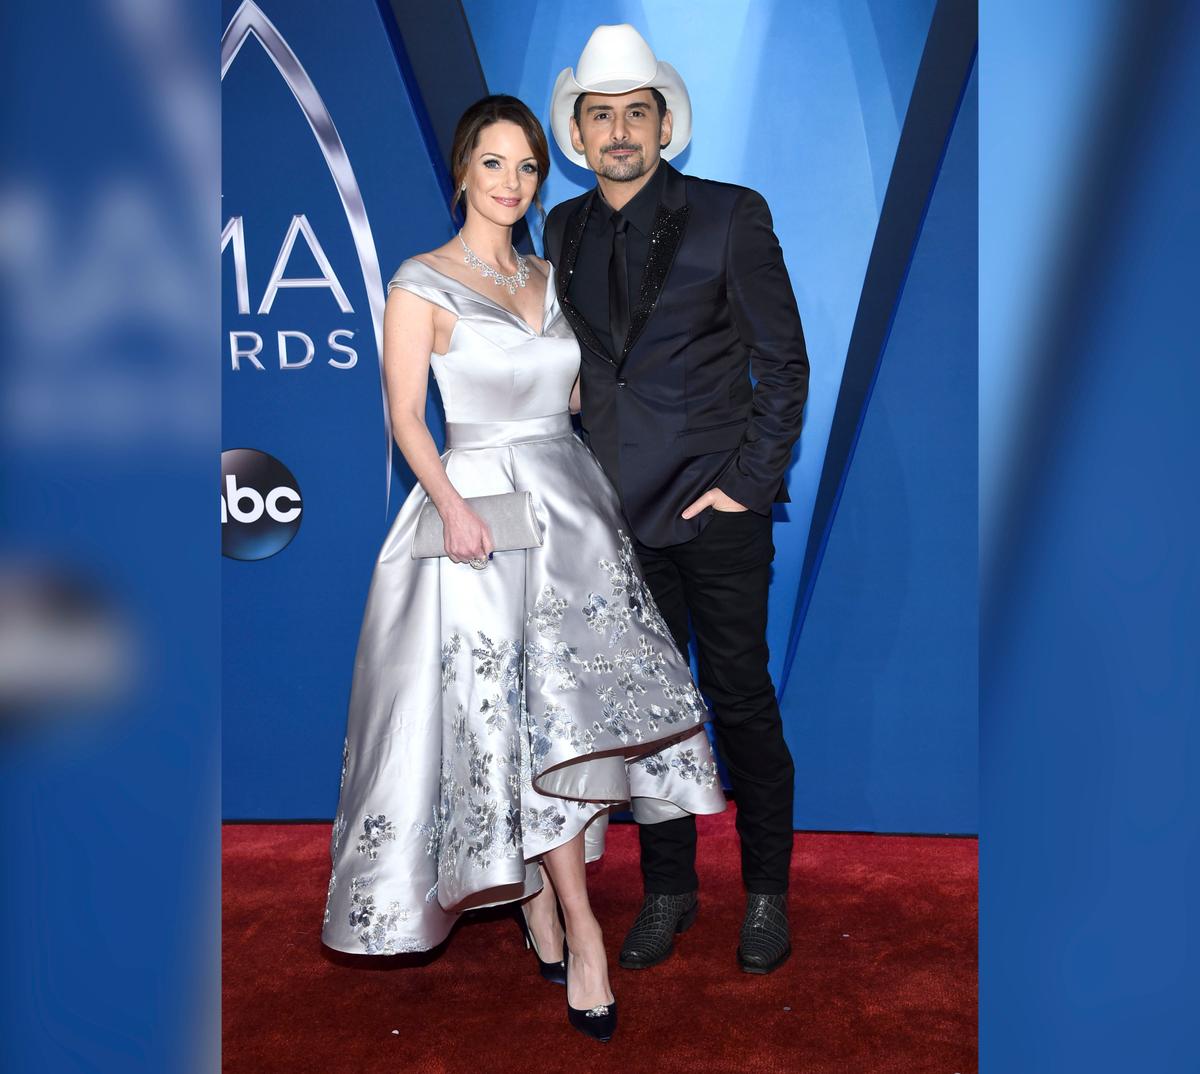 Kimberly Williams-Paisley (L) and Brad Paisley arrive at the 51st annual CMA Awards on Wednesday, Nov. 8, 2017, in Nashville, Tenn. (Evan Agostini/Invision/AP)